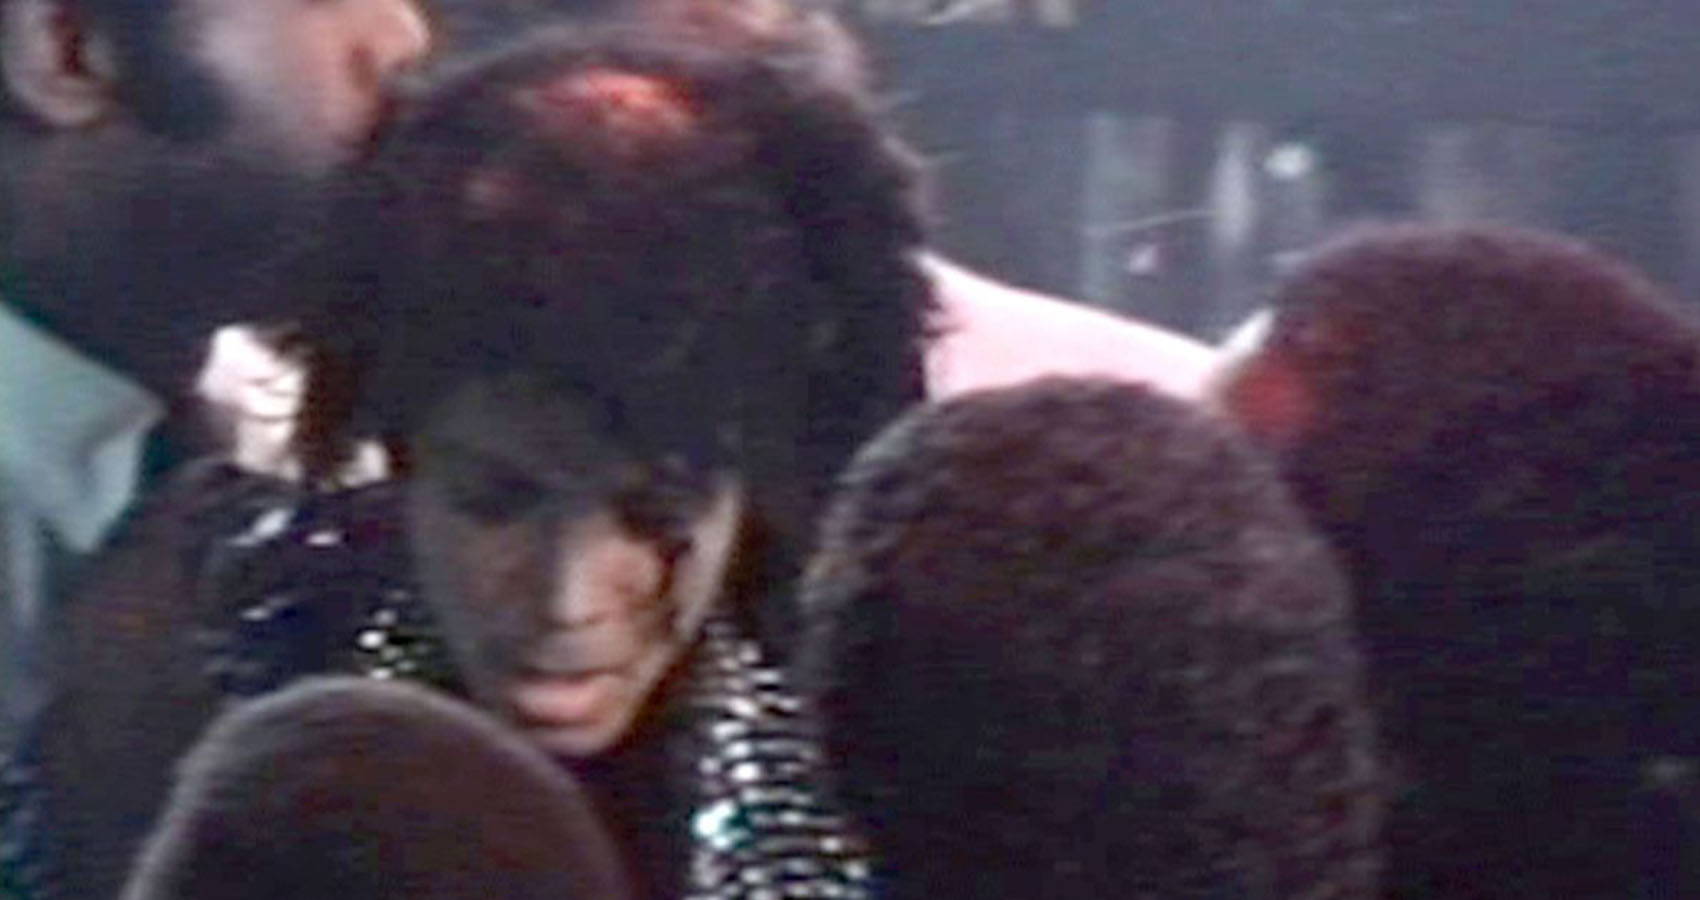 hard to believe facts - Michael Jackson's hair caught fire on 27 Jan 1984 which was the exact midpoint of his life.